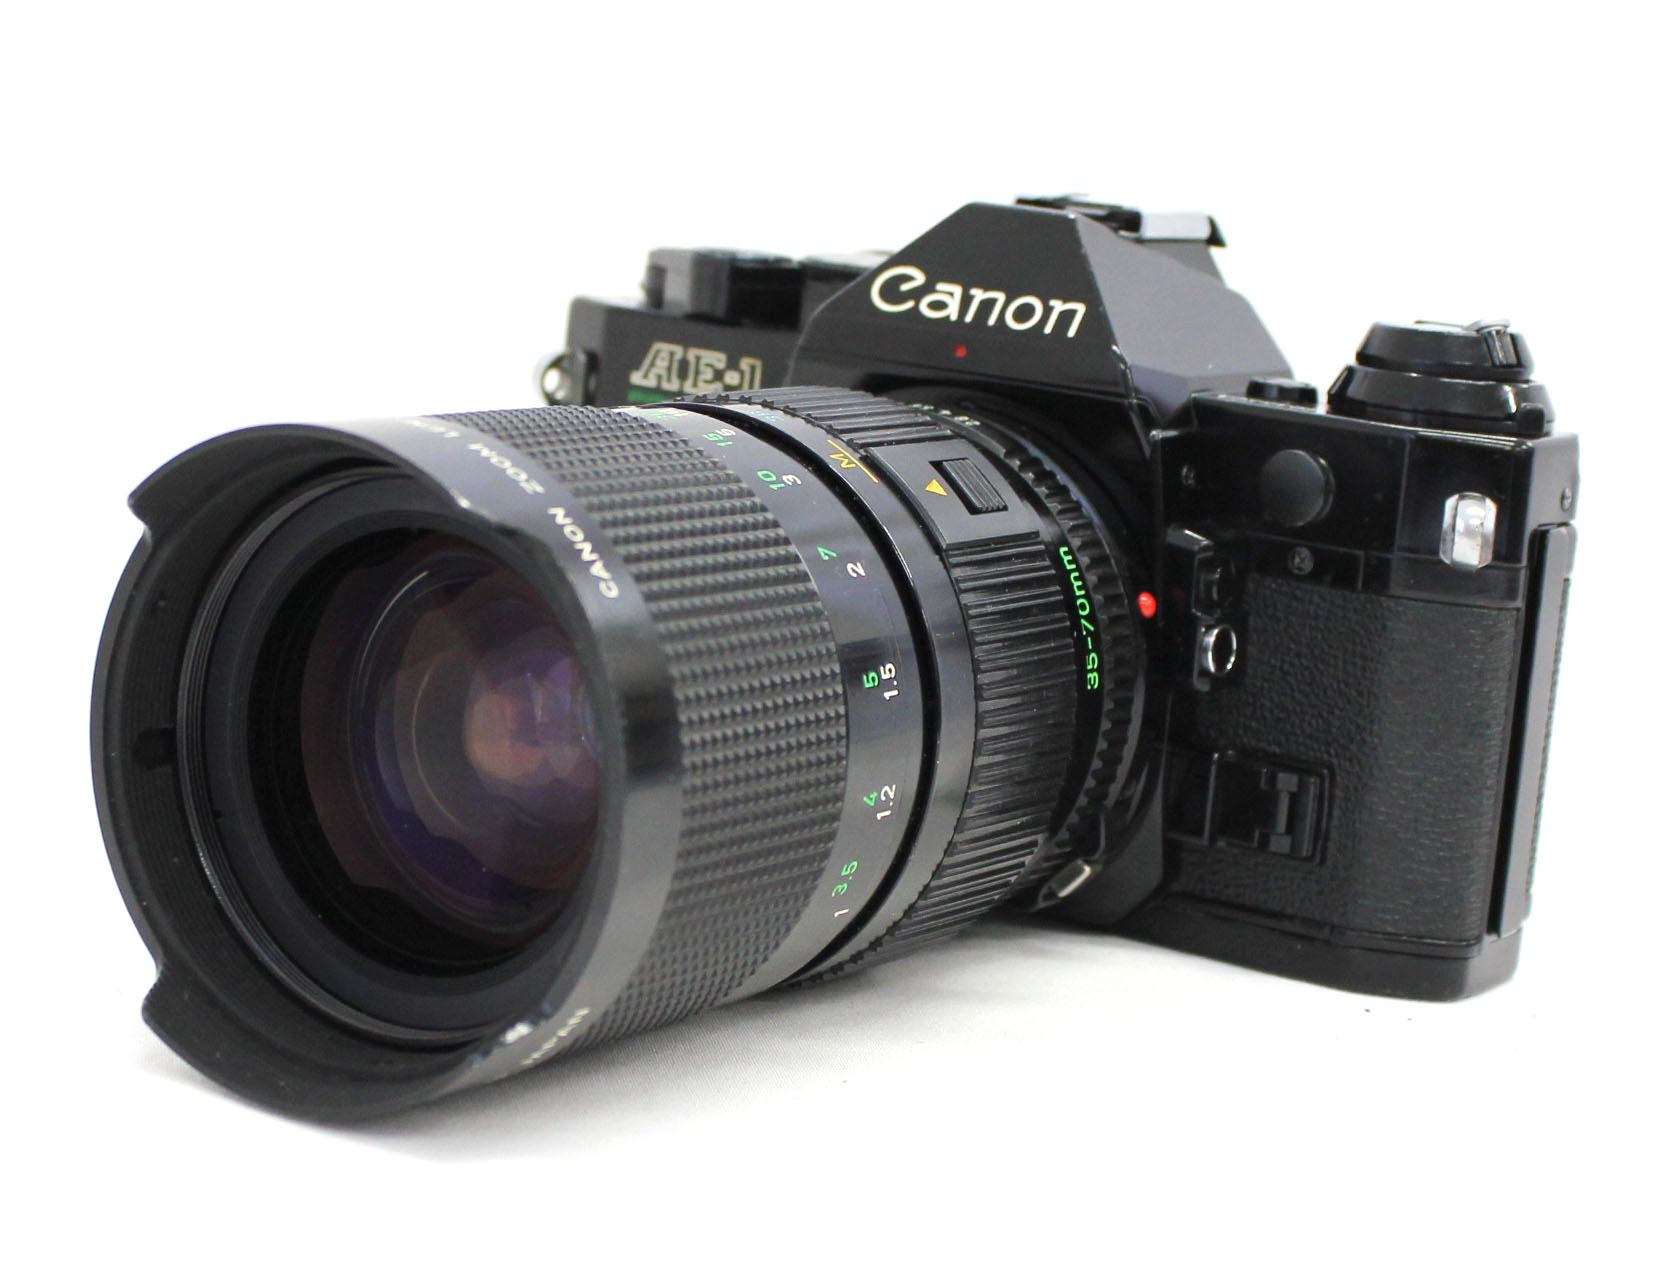 Canon AE-1 PROGRAM 35mm film camera w Canon Zoom FD 35-70mm A2 Power Winder 70-210mm f3.5 lenses Instructions and More